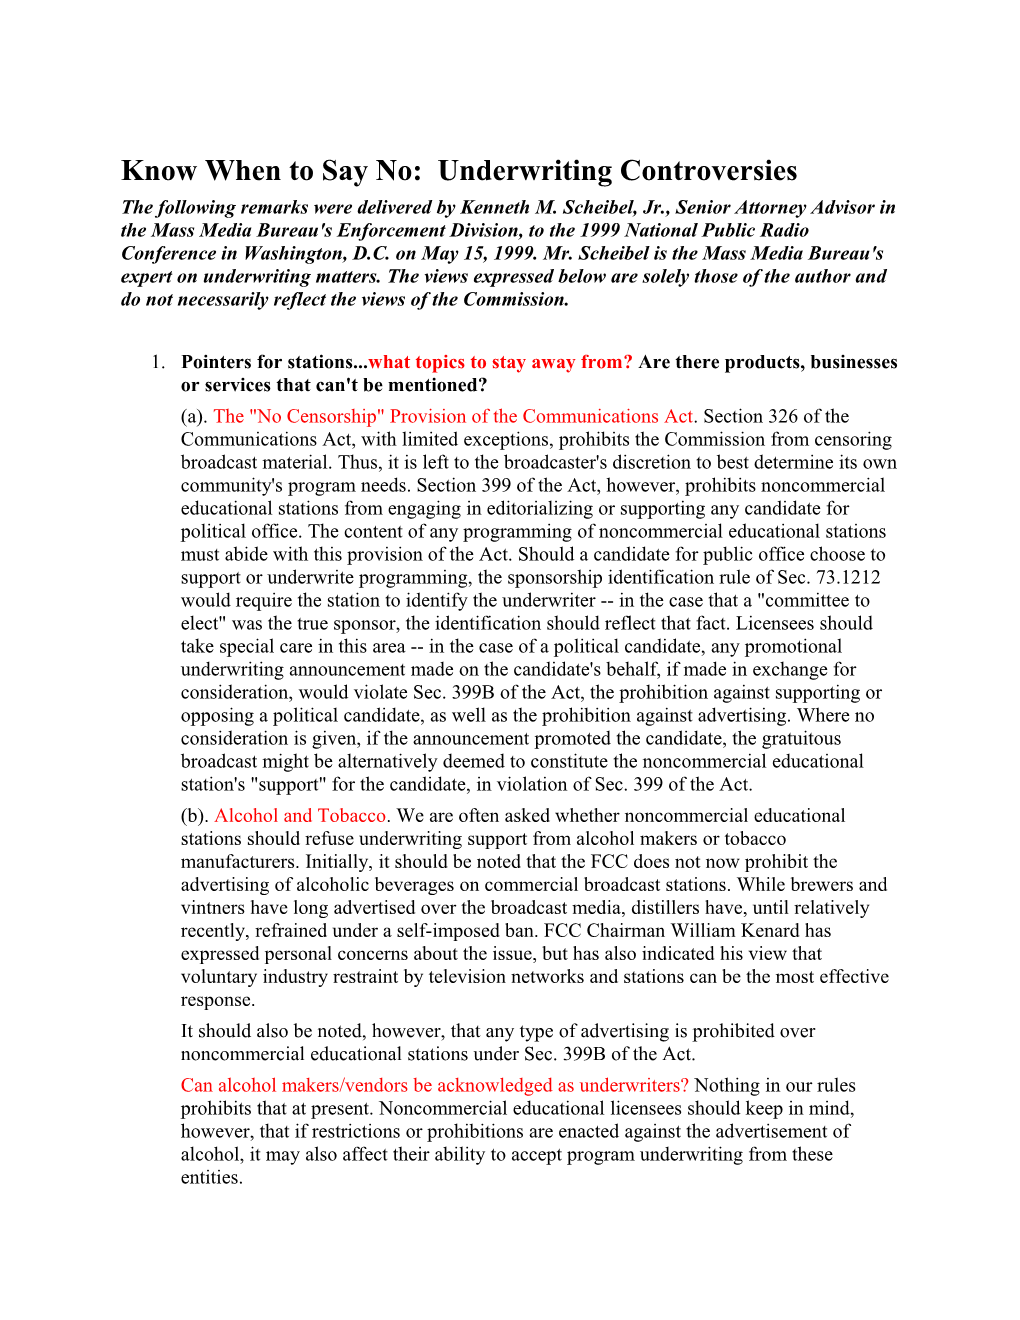 Know When to Say No:Underwriting Controversies